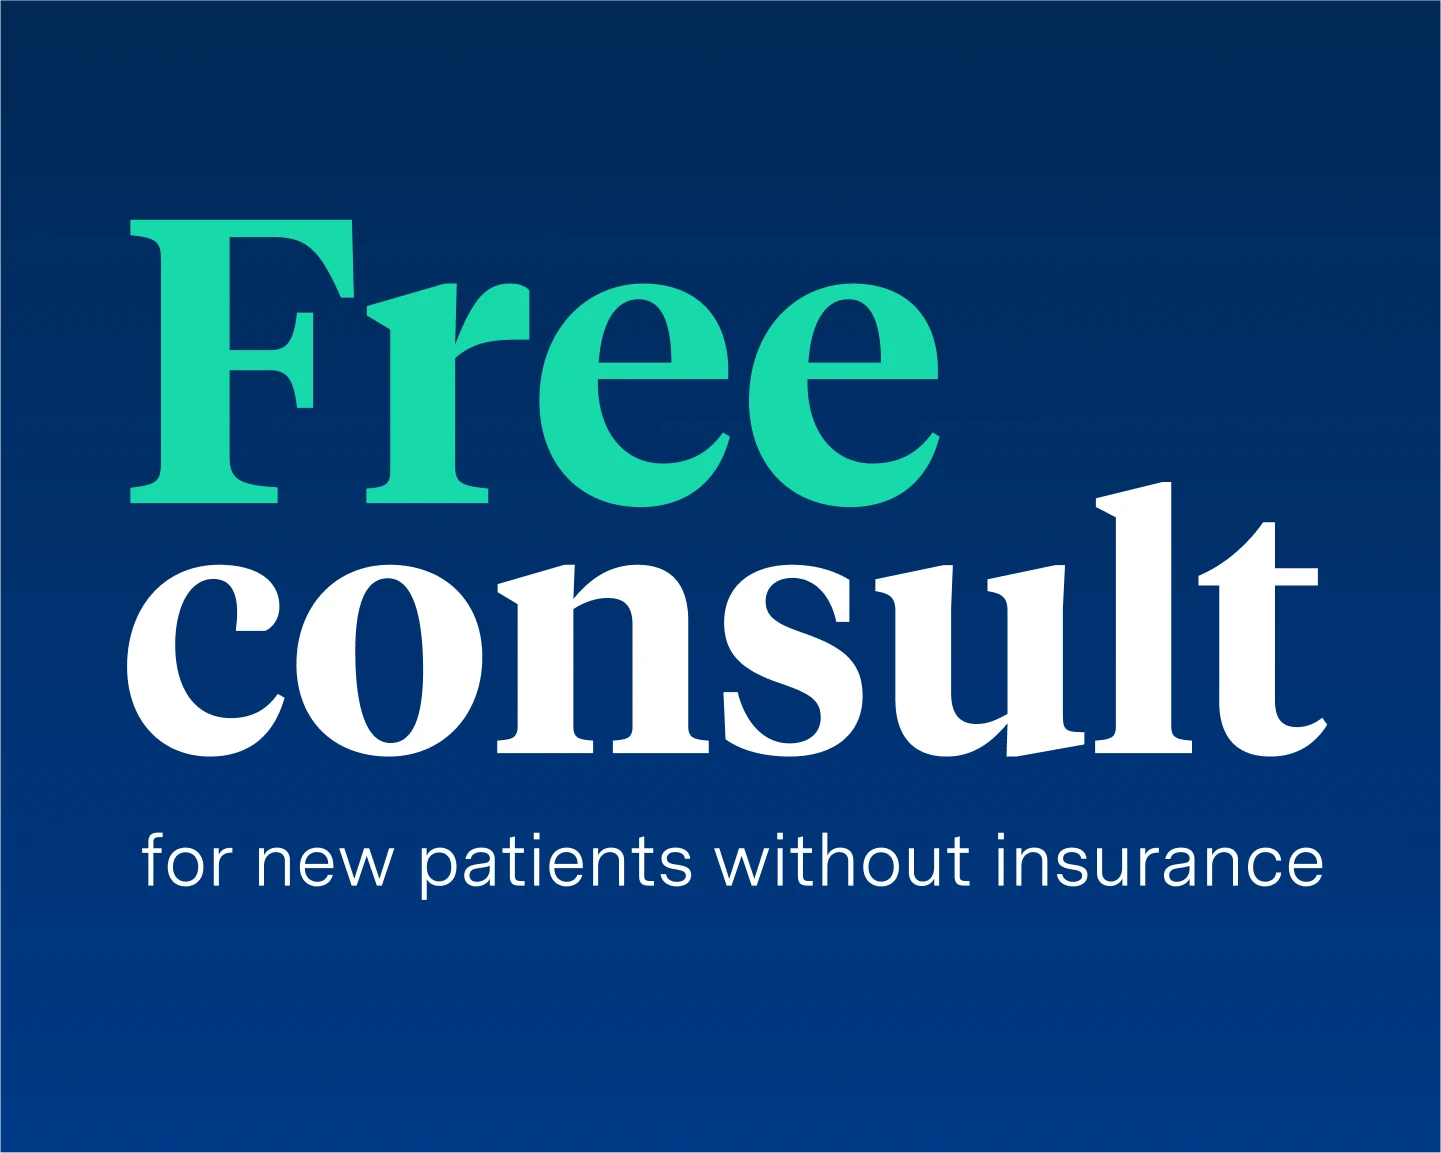 Free consult for new patients without insurance. 